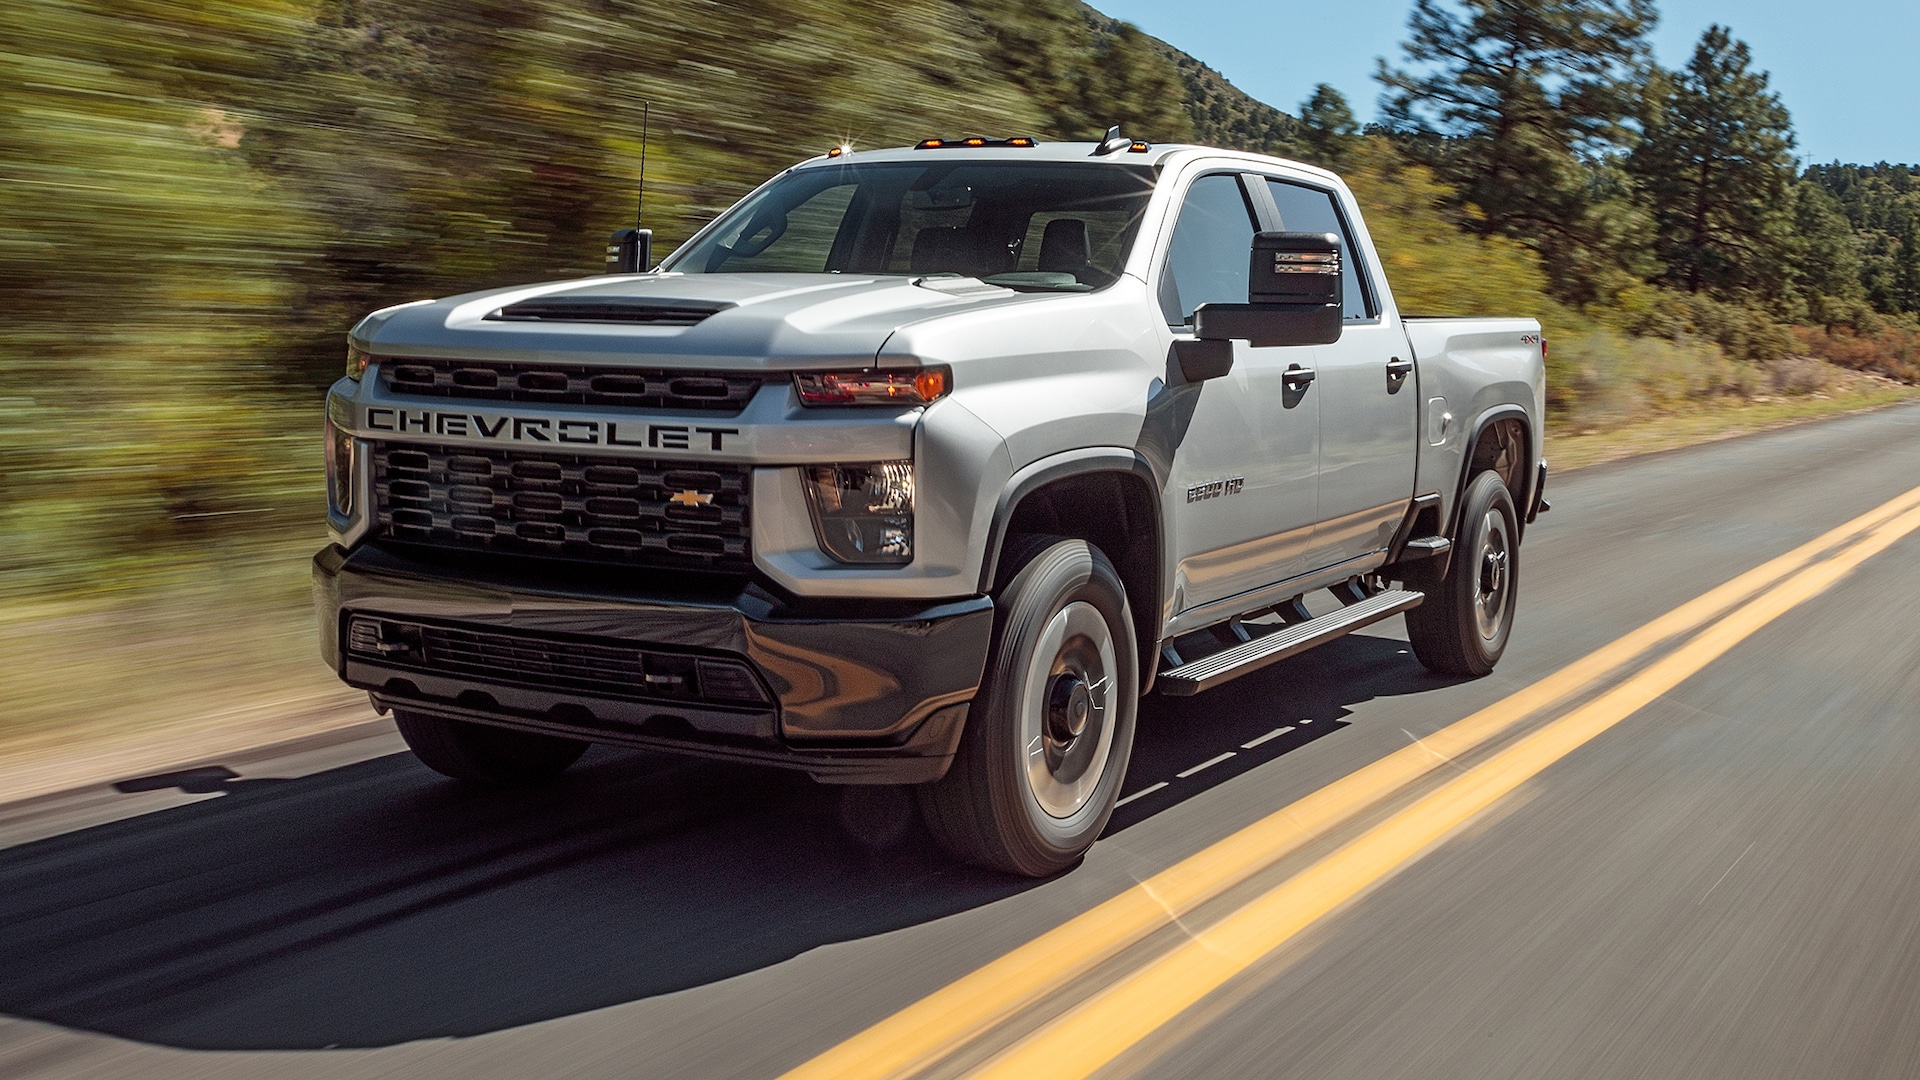 Review: The Chevrolet Silverado 2500HD is Good on Paper, But...